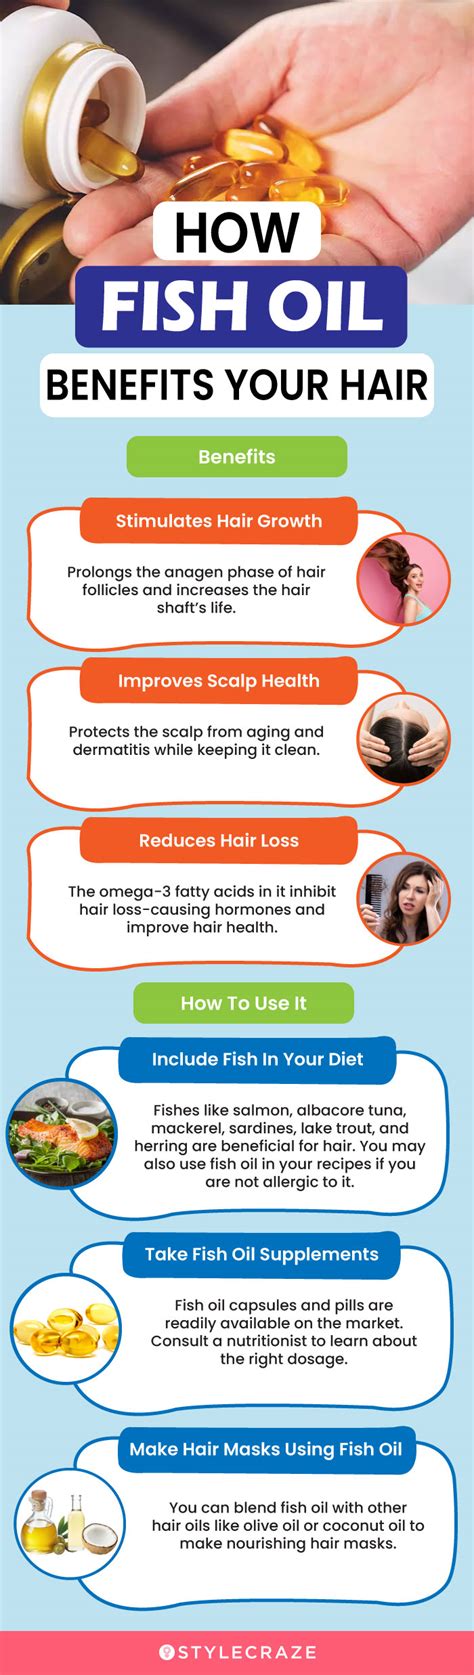 Fish oil and hair growth